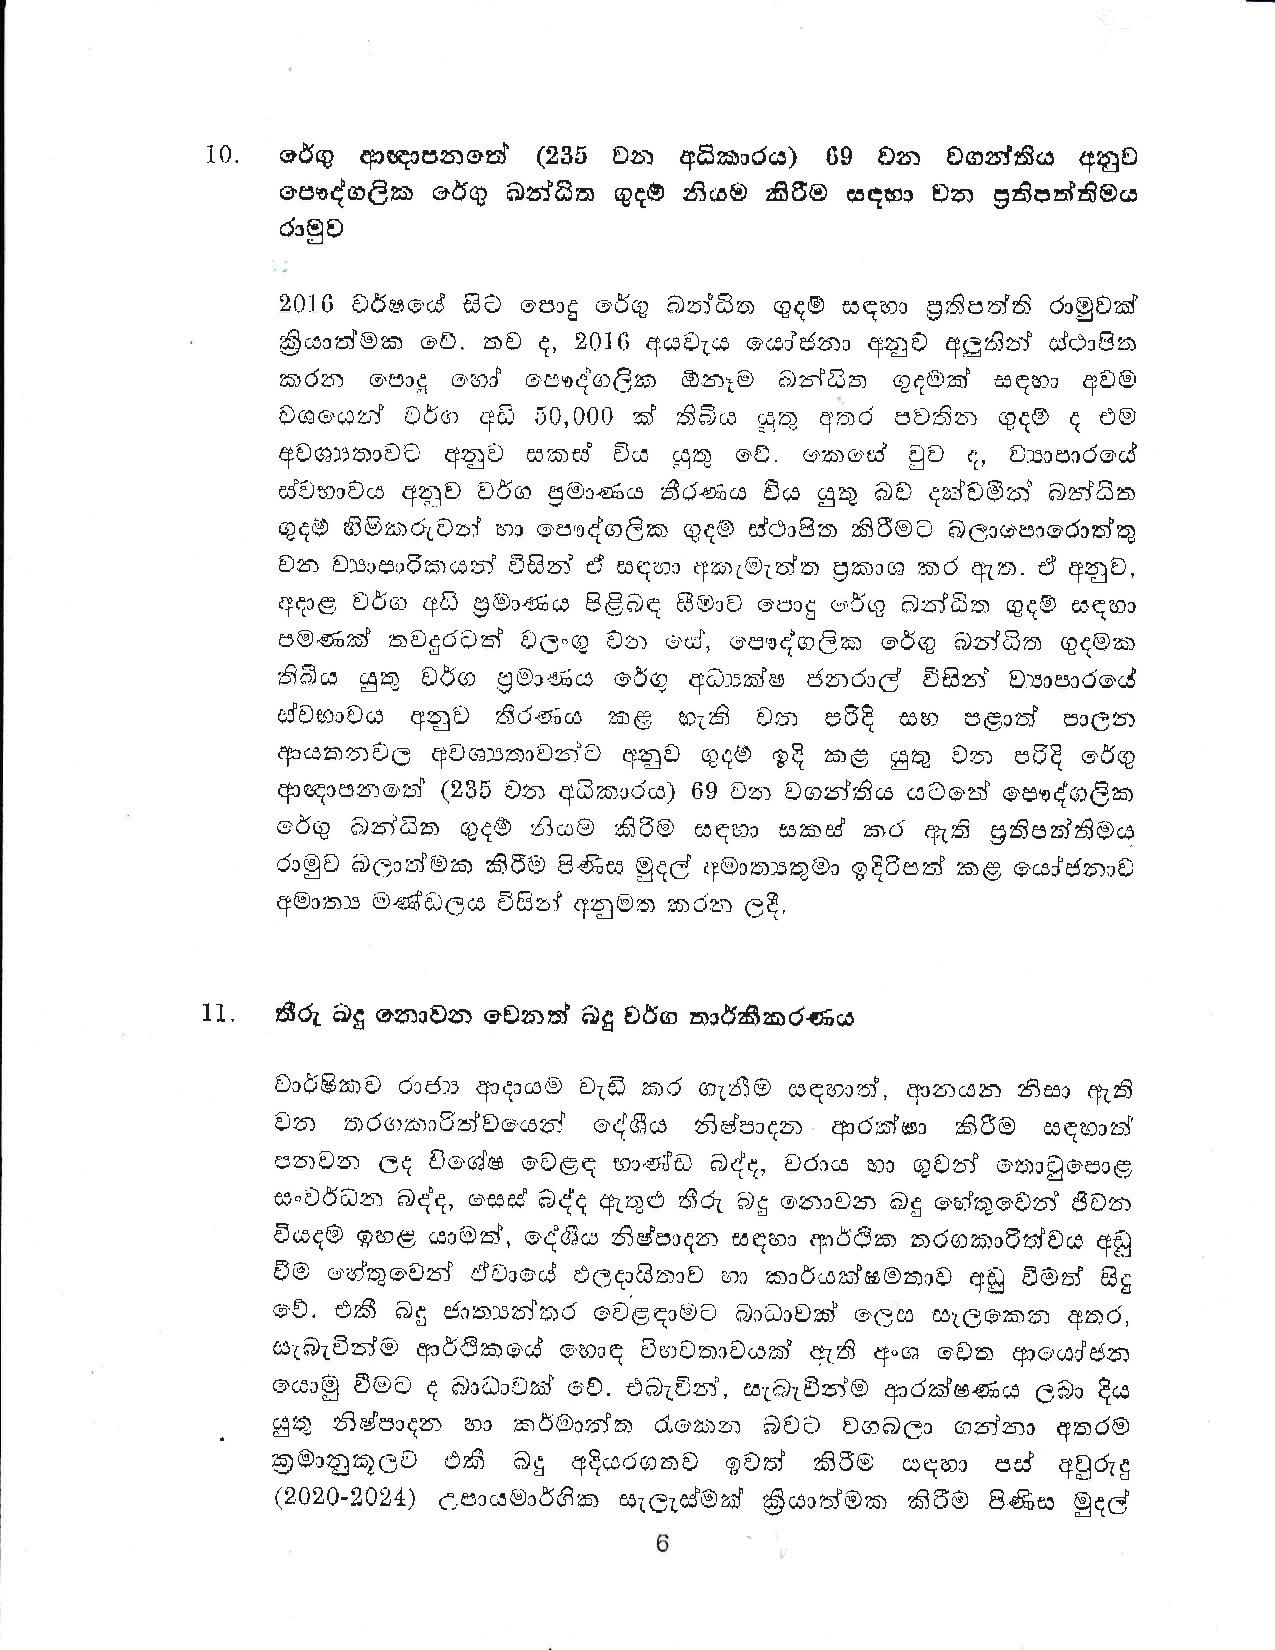 Cabinet Decision on 15.10.2019 page 006